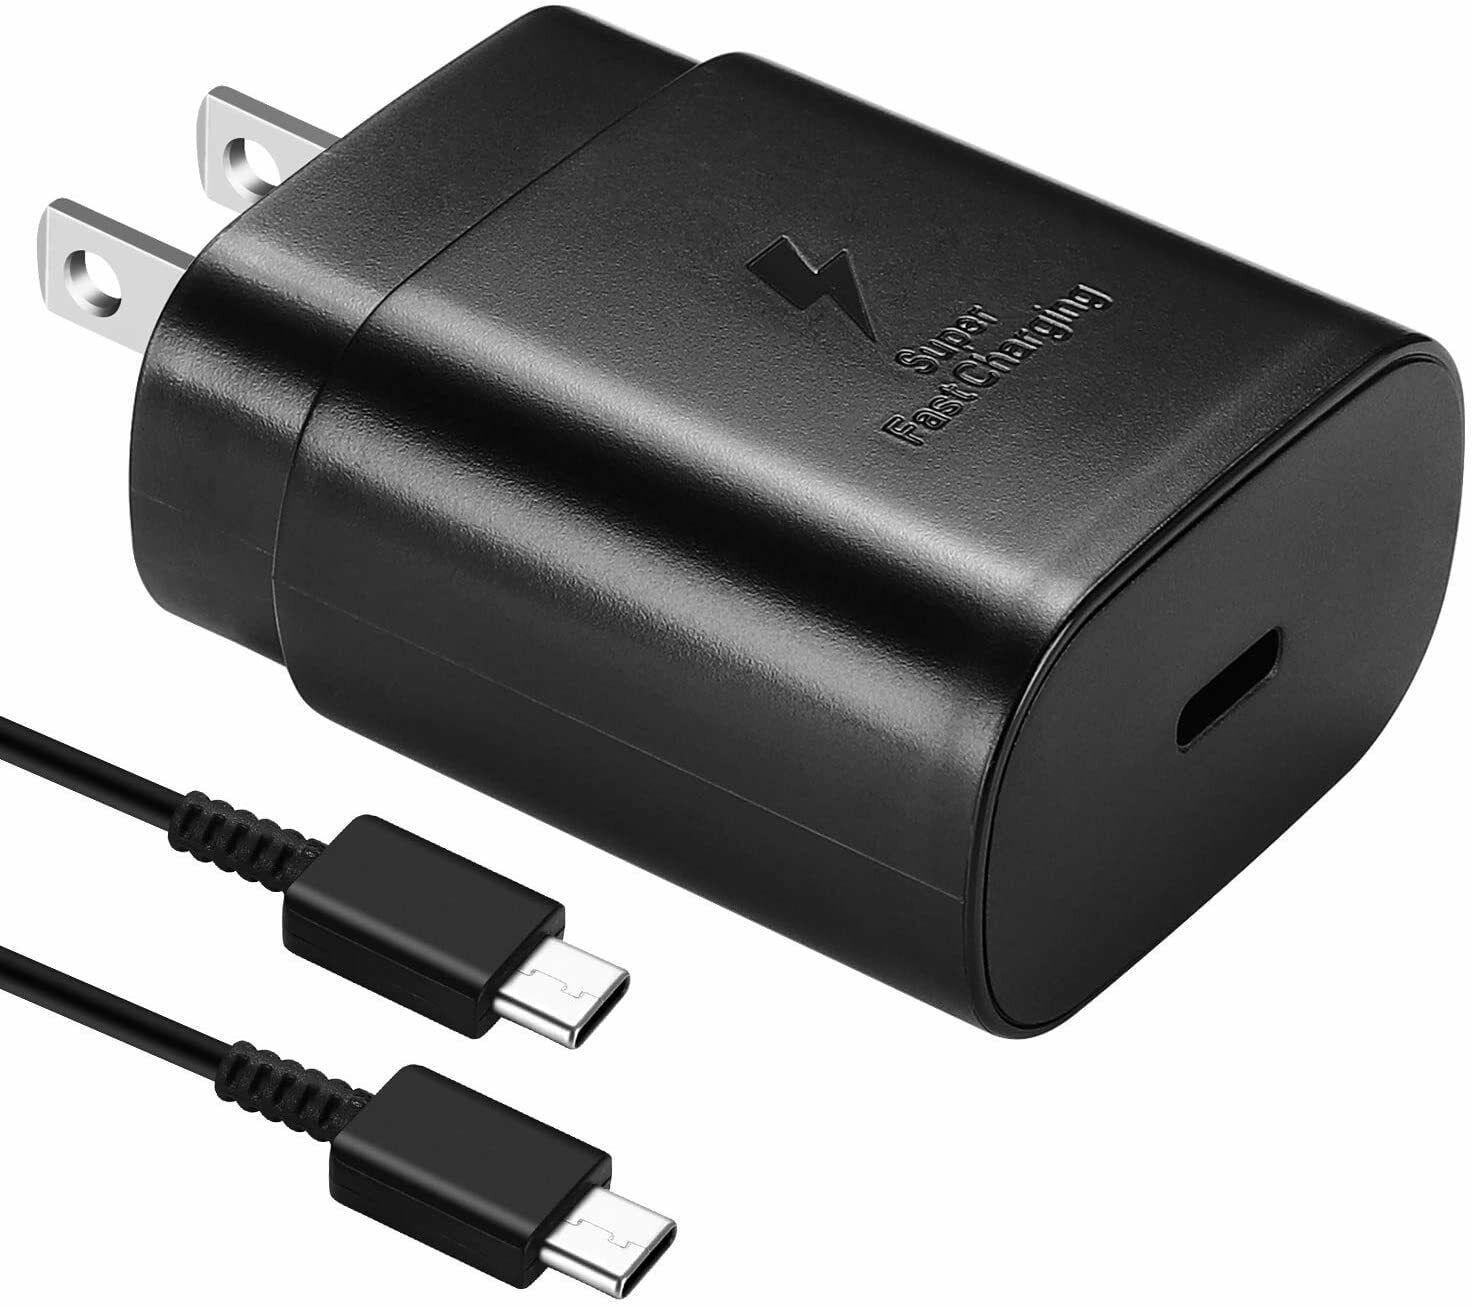 Galaxy S21, S21+, S21 Ultra USB-C Cables For Fast Charging [List